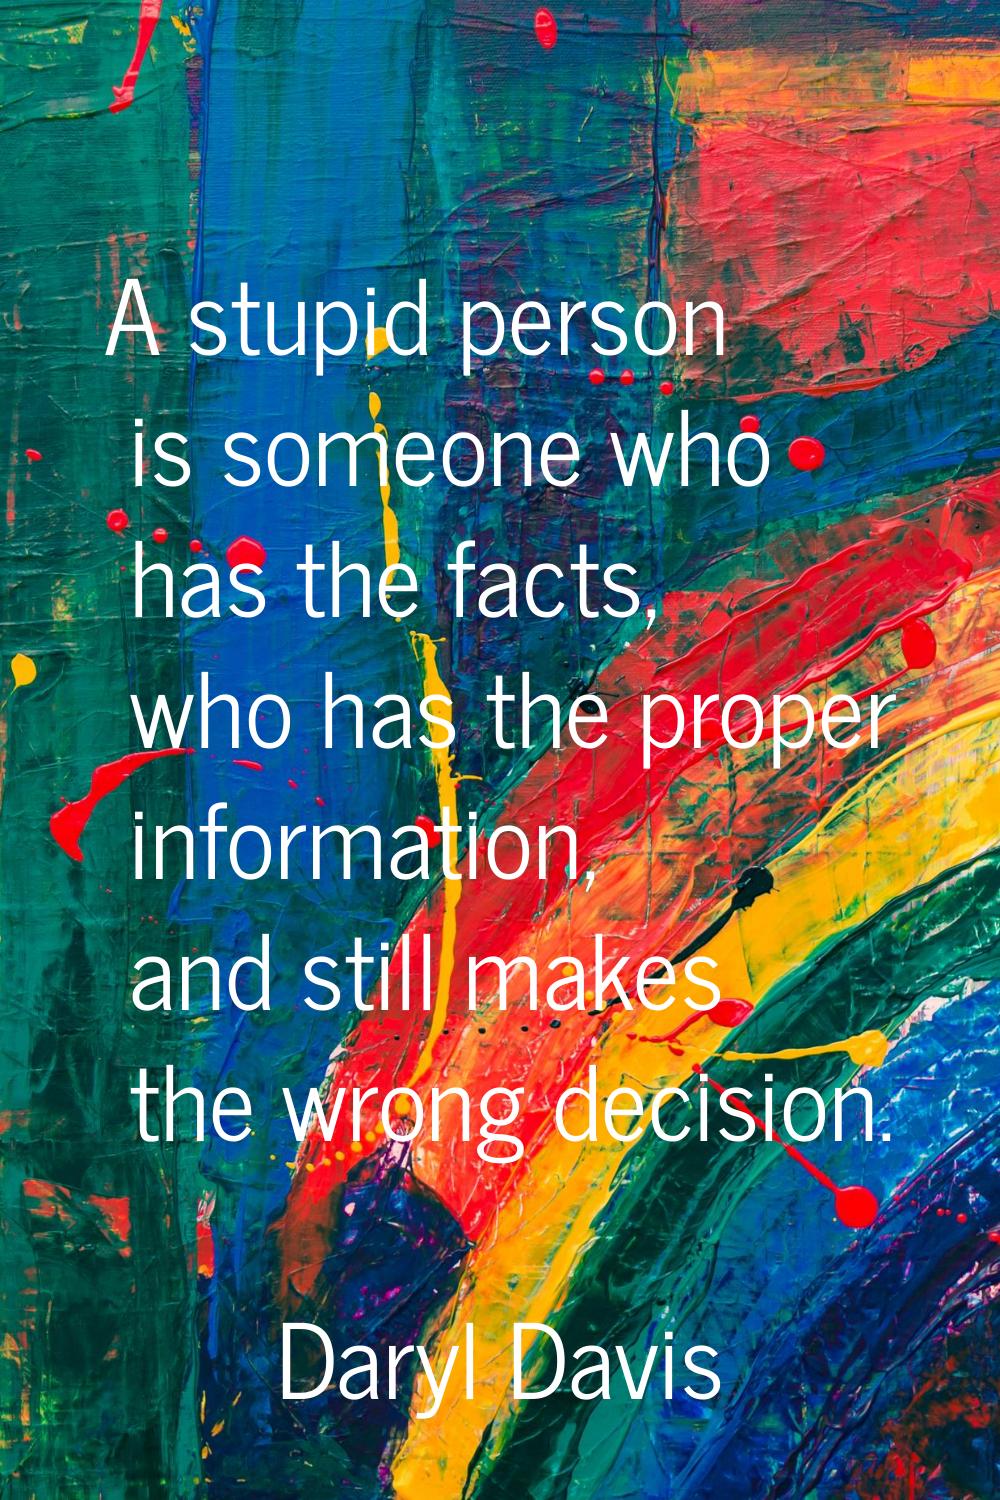 A stupid person is someone who has the facts, who has the proper information, and still makes the w